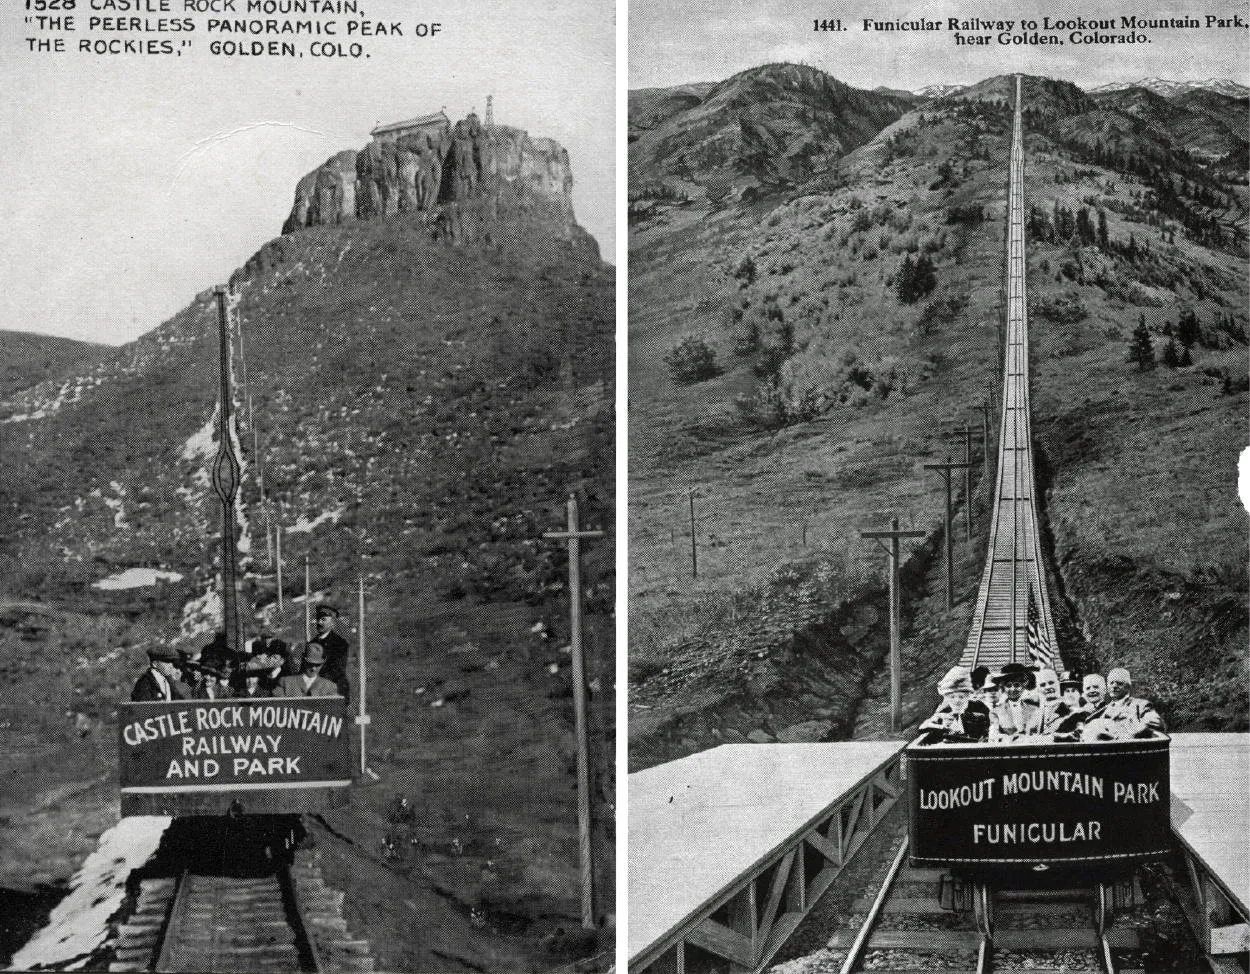 2 images of funicular railways: one says Castle Rock Mountain Railway and Park, other says Lookout Mountain Park Funicular